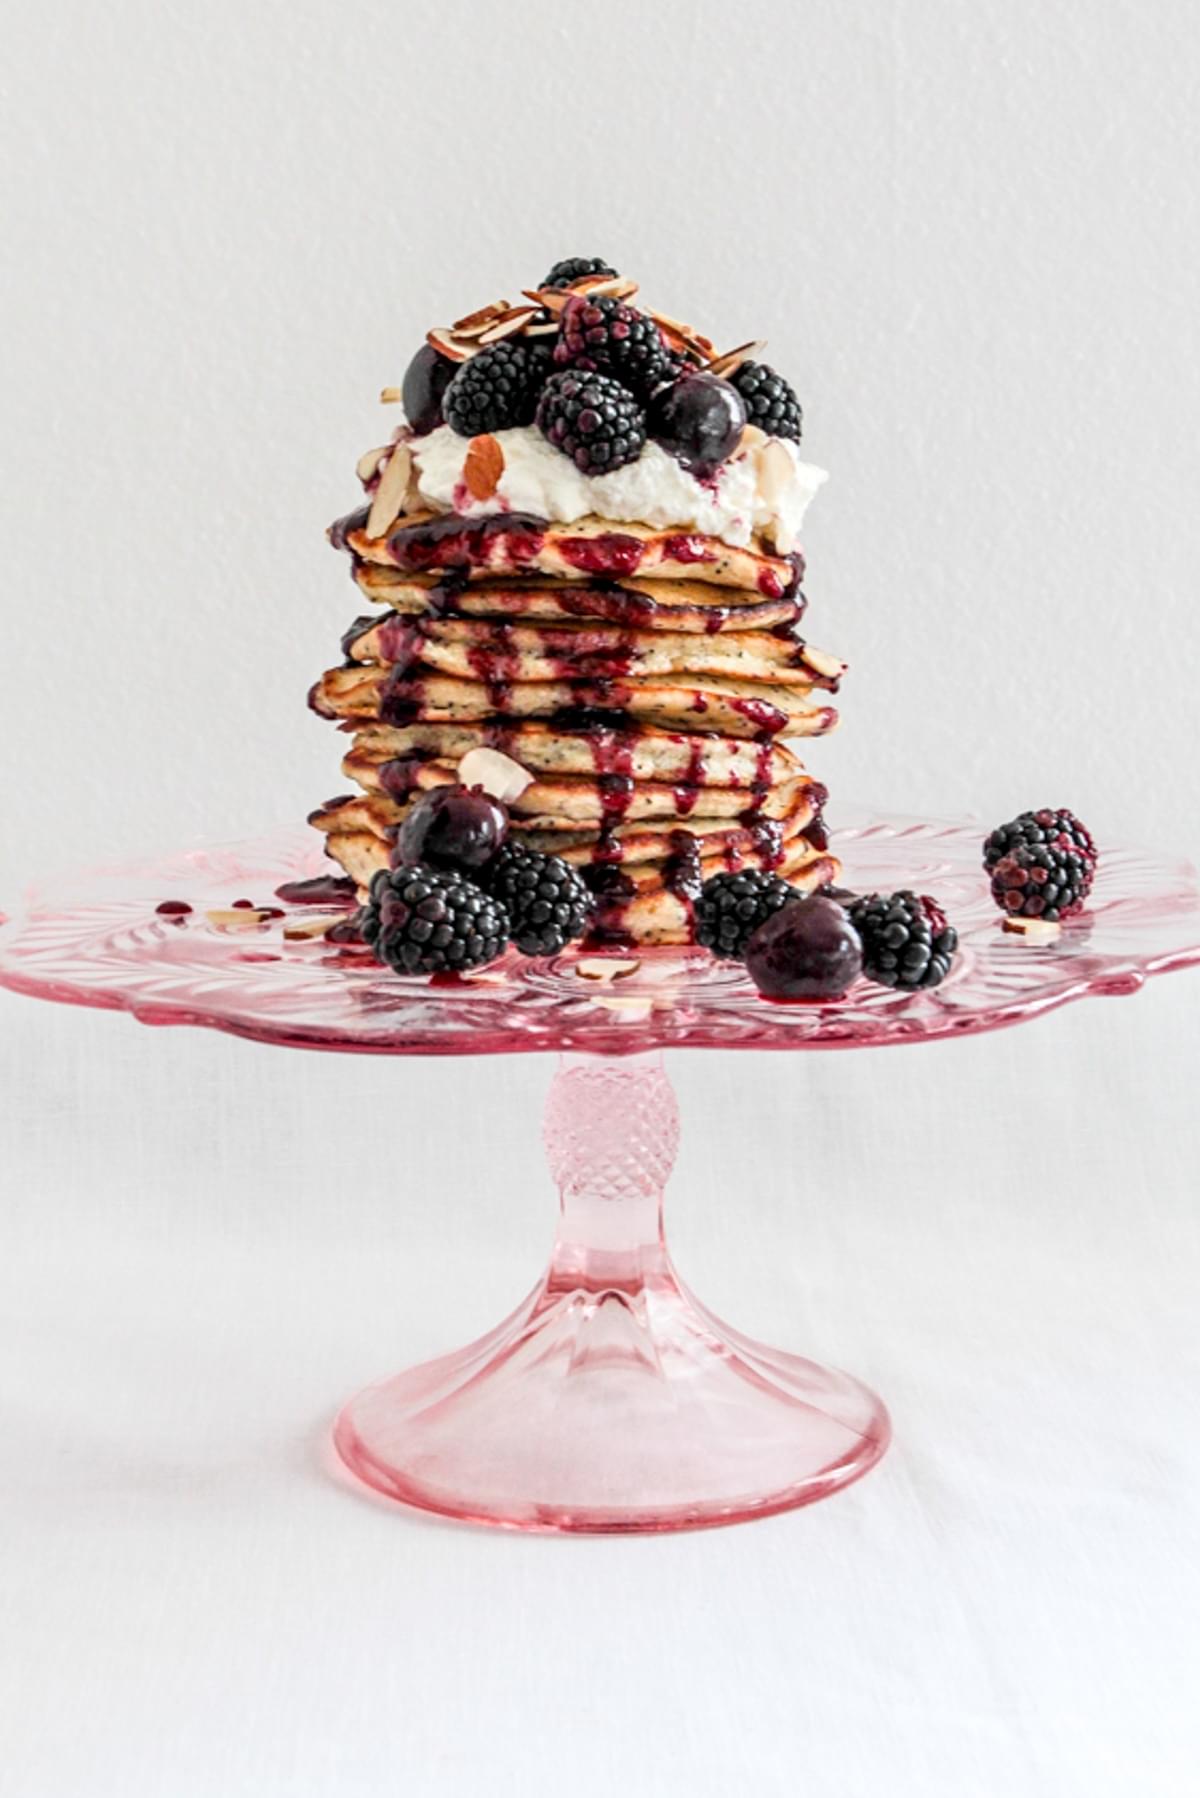 a stack of almond poppy seed pancakes topped with whipped cream, fresh berries and maple syrup on a pink cake plate